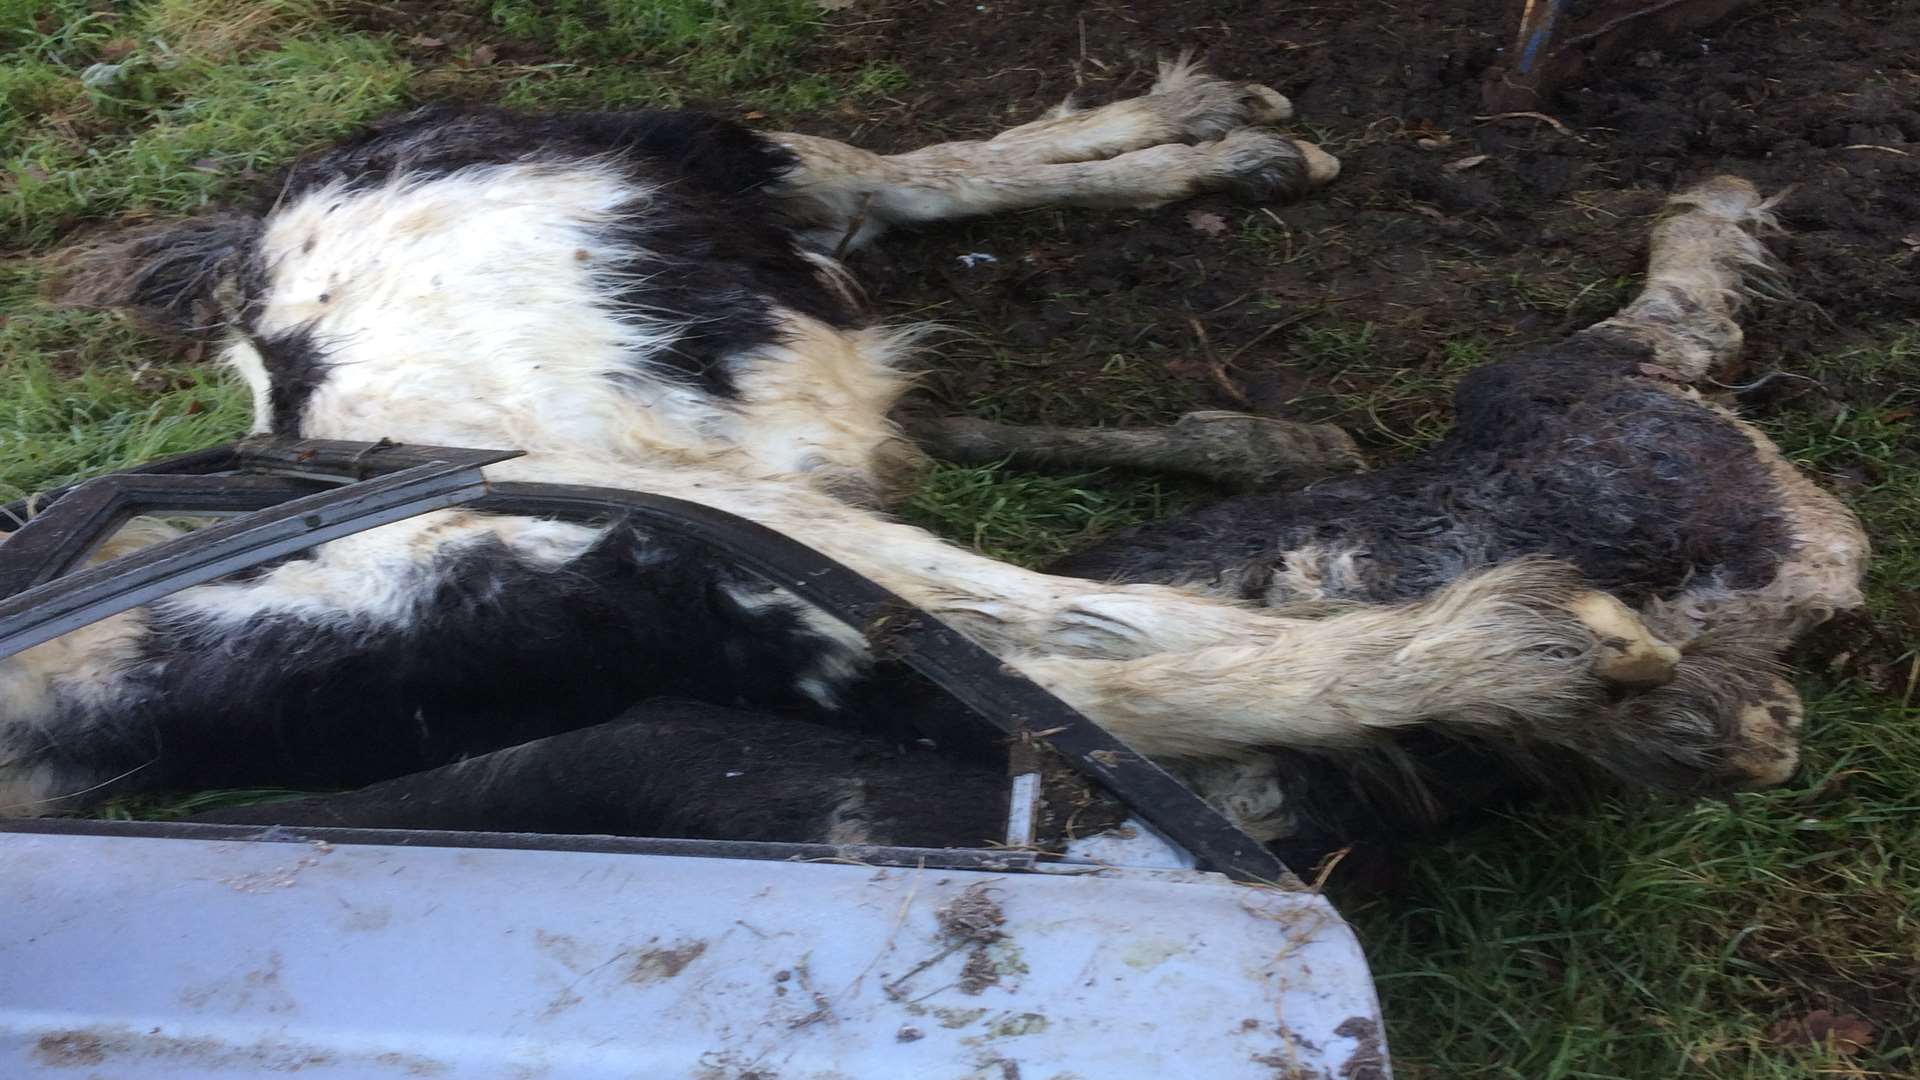 The two horses were found covered by a car door.